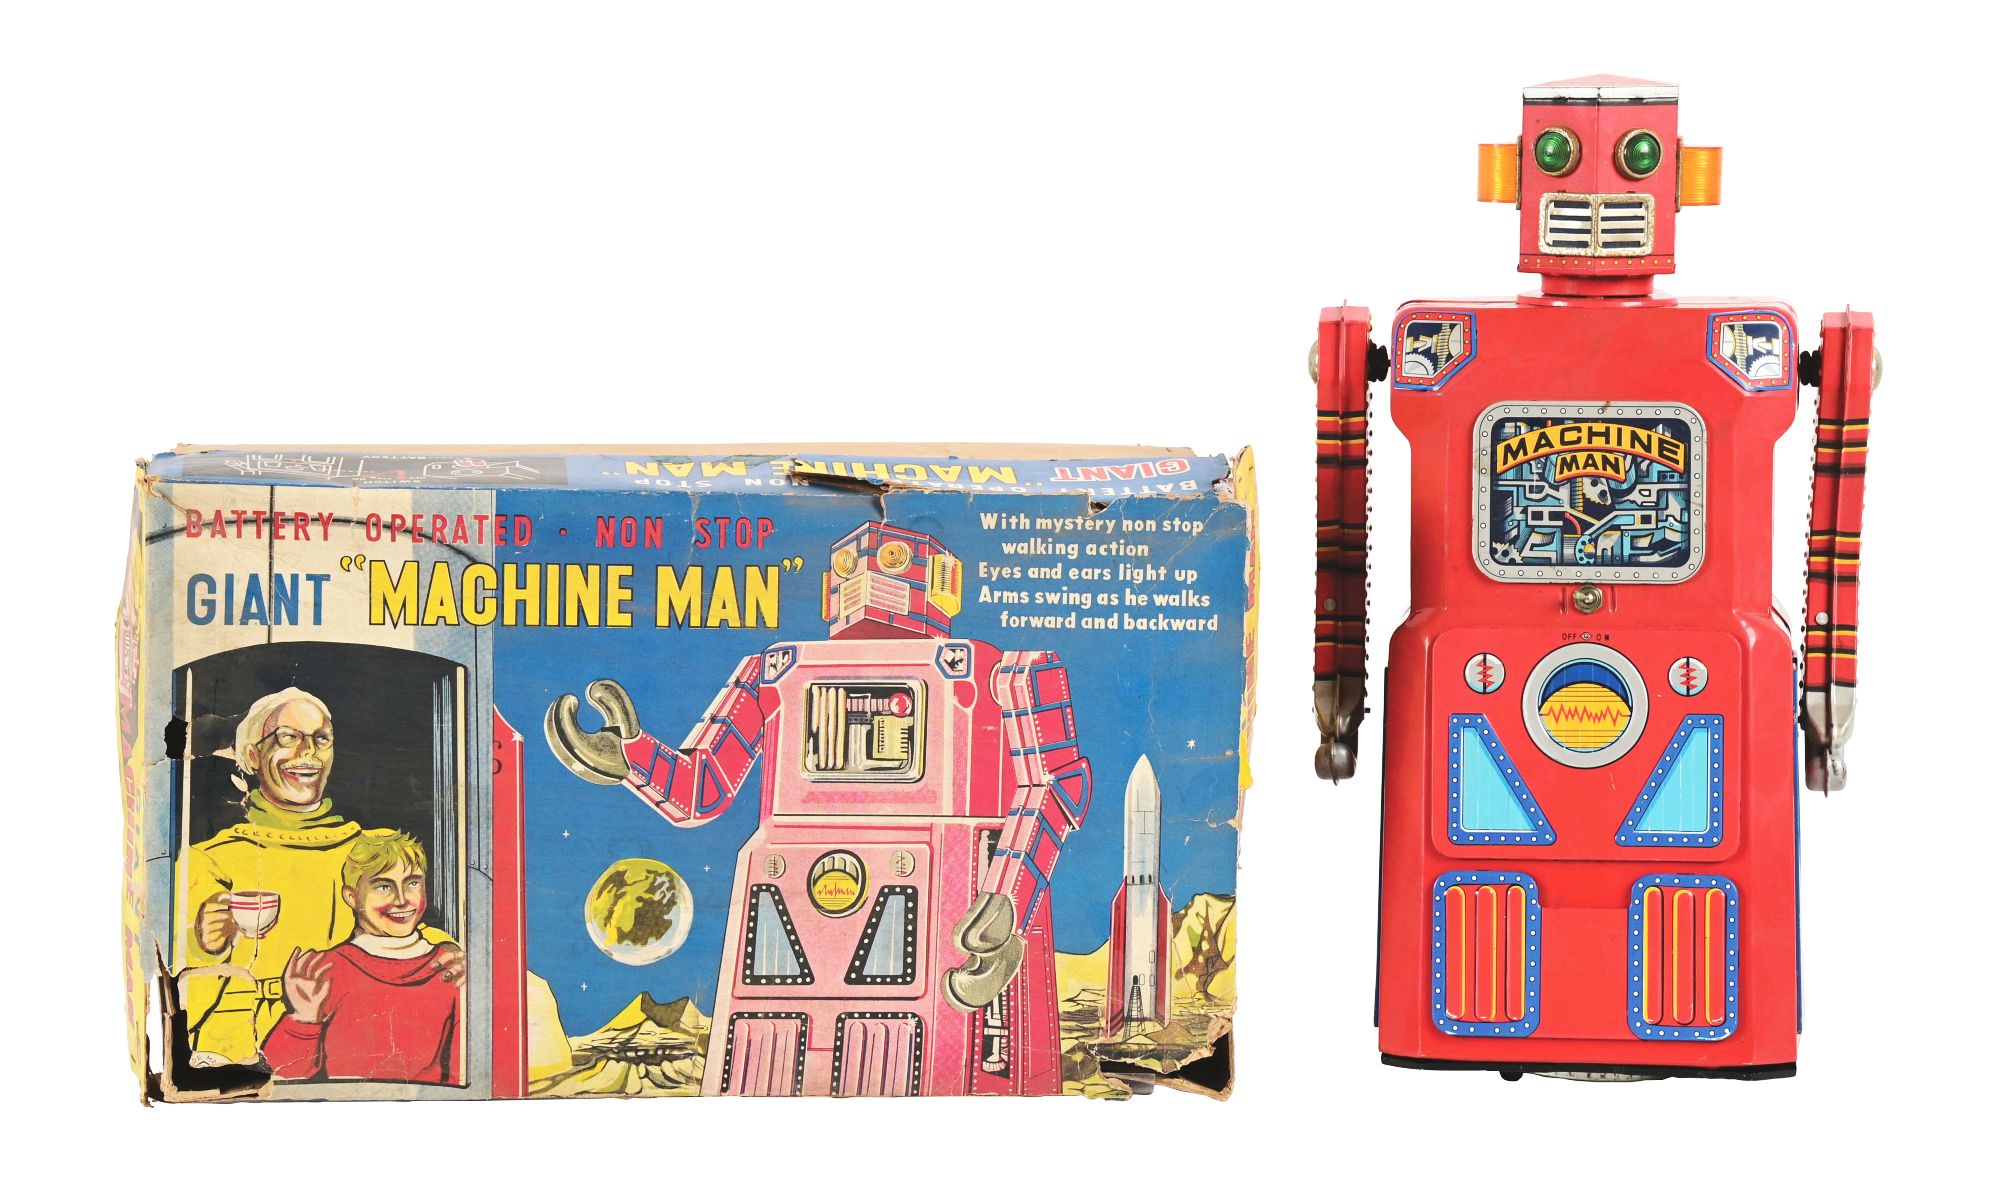 Circa-1960 Masudaya Machine Man Robot accompanied by original graphic box with inserts. One of very few known examples. From the famed Gang of Five robot series. Very Good to Excellent condition. Estimate $60,000-$90,000